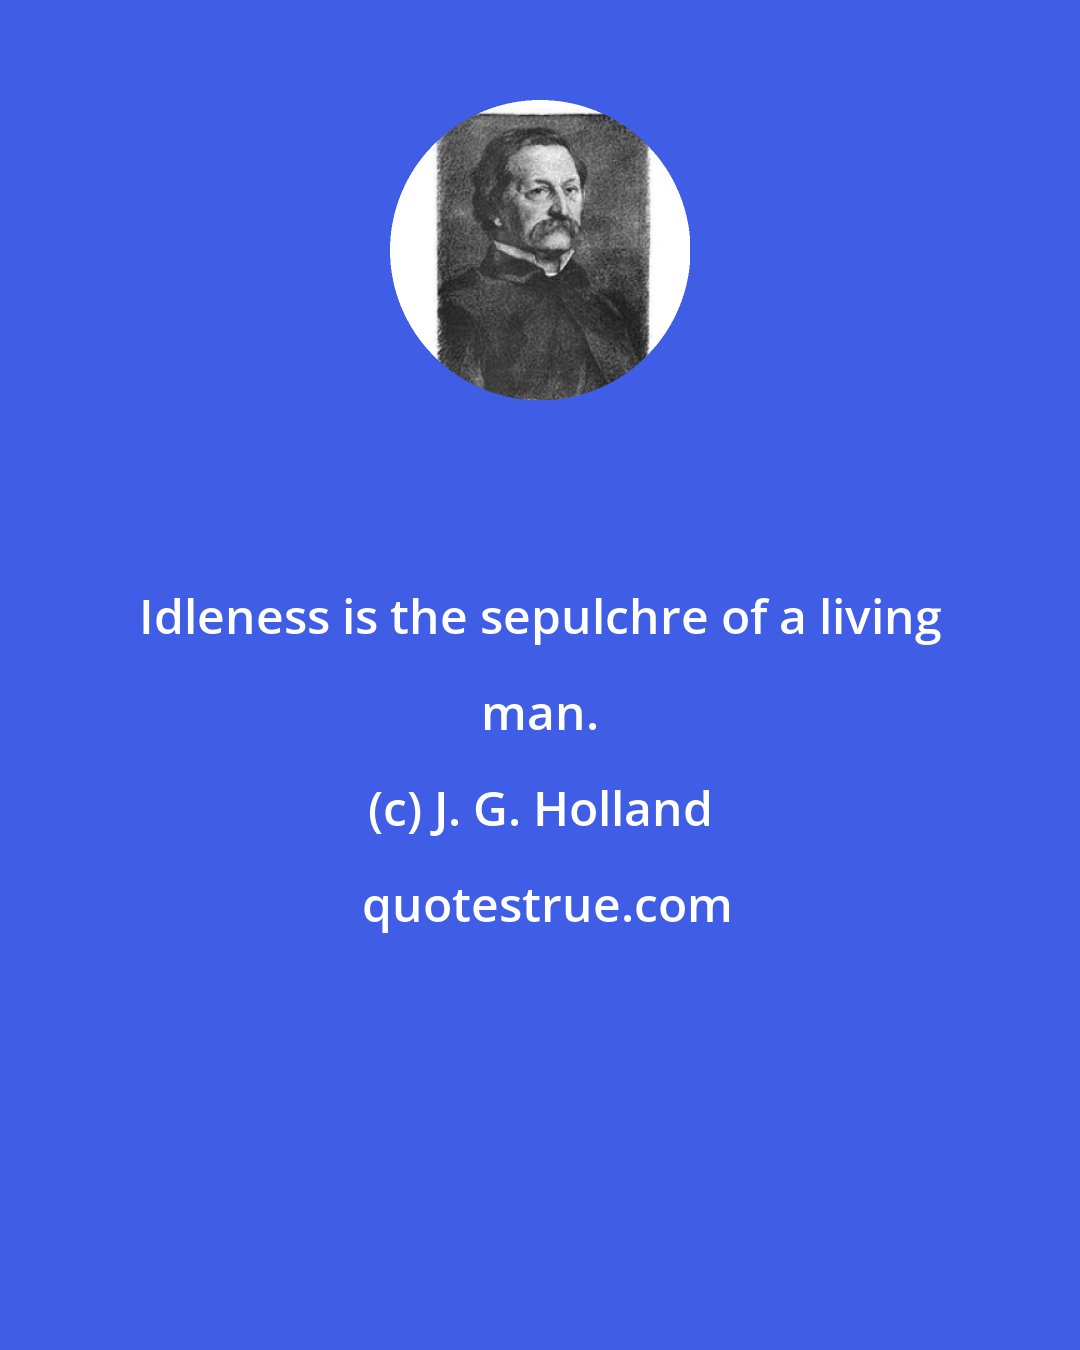 J. G. Holland: Idleness is the sepulchre of a living man.